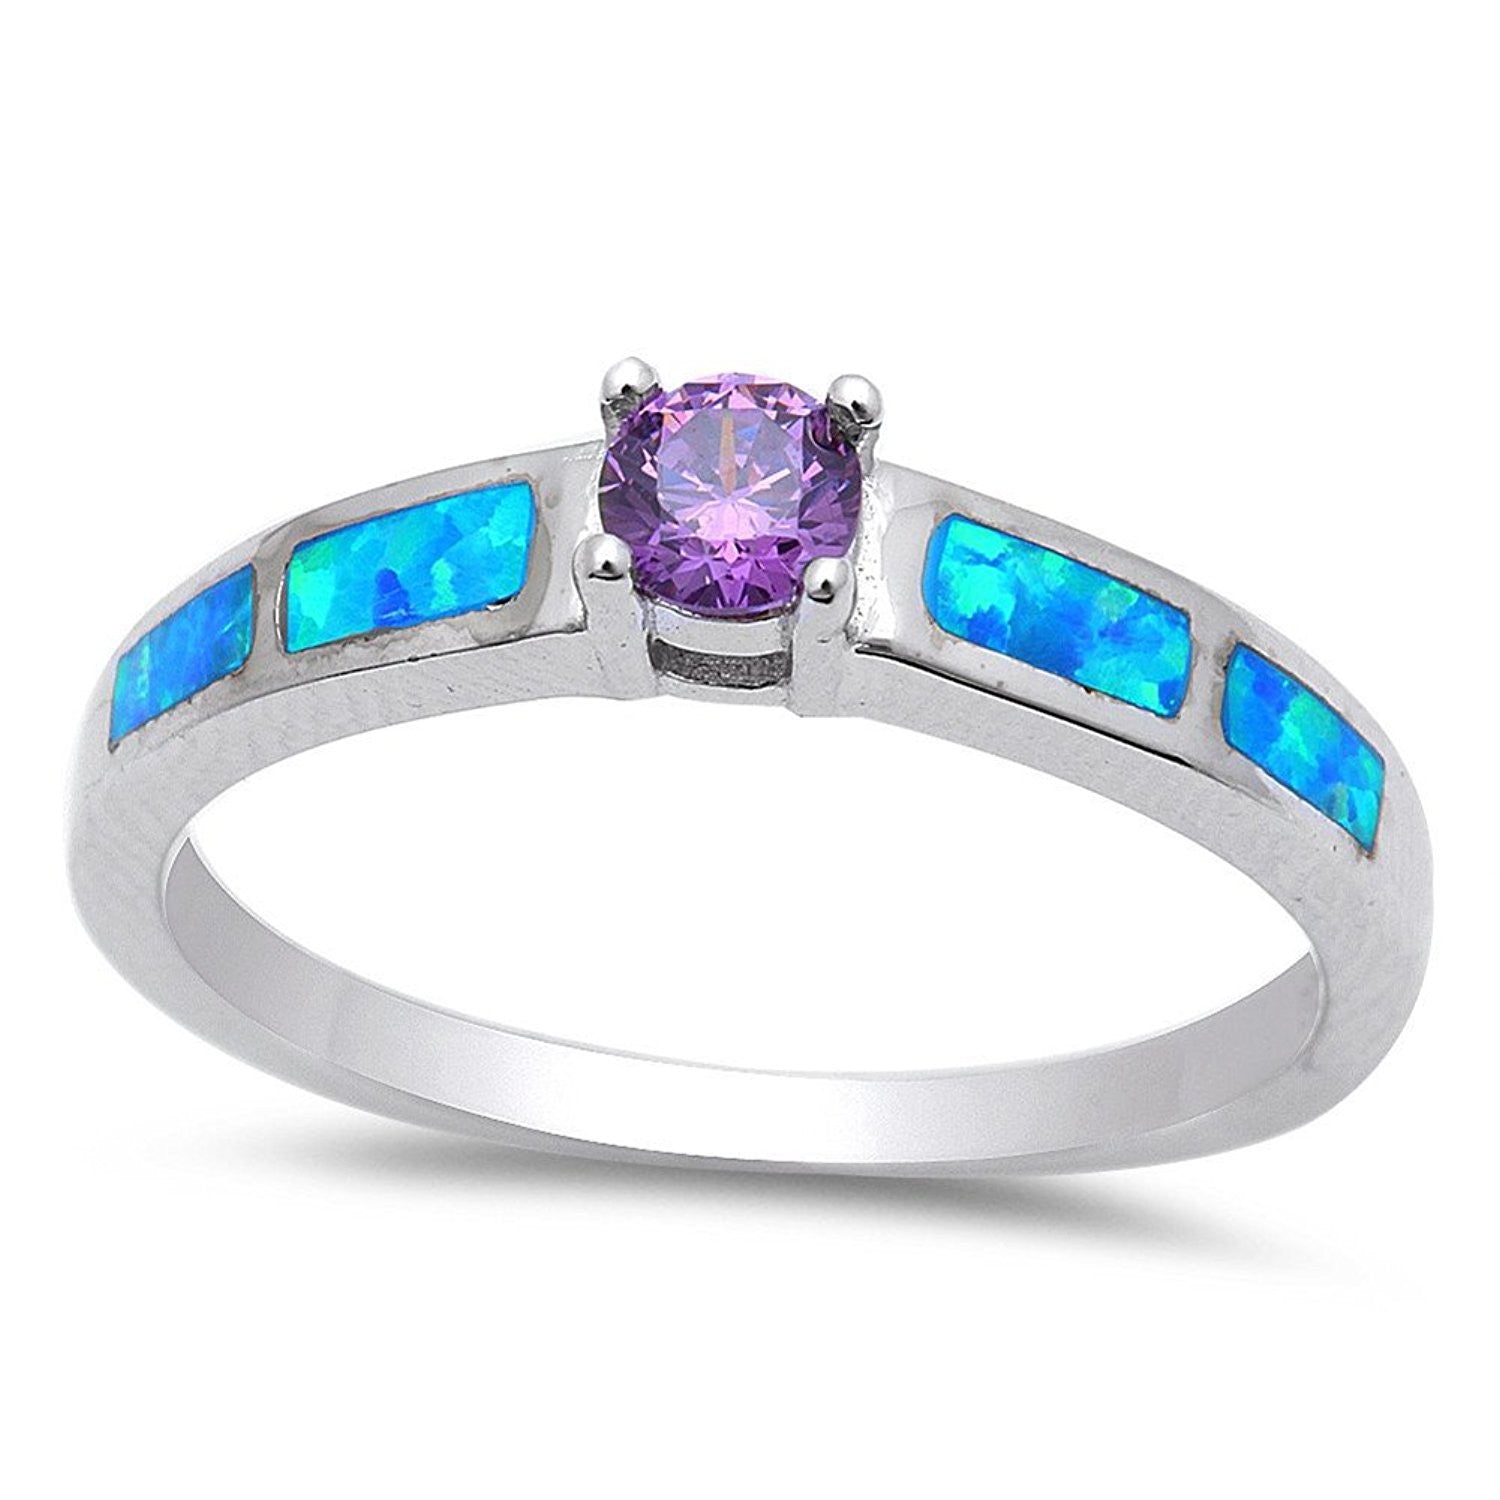 Fashion Solitaire Accent Ring Lab Created White Opal Round Simulated Purple Amethyst 925 Sterling Silver - Blue Apple Jewelry